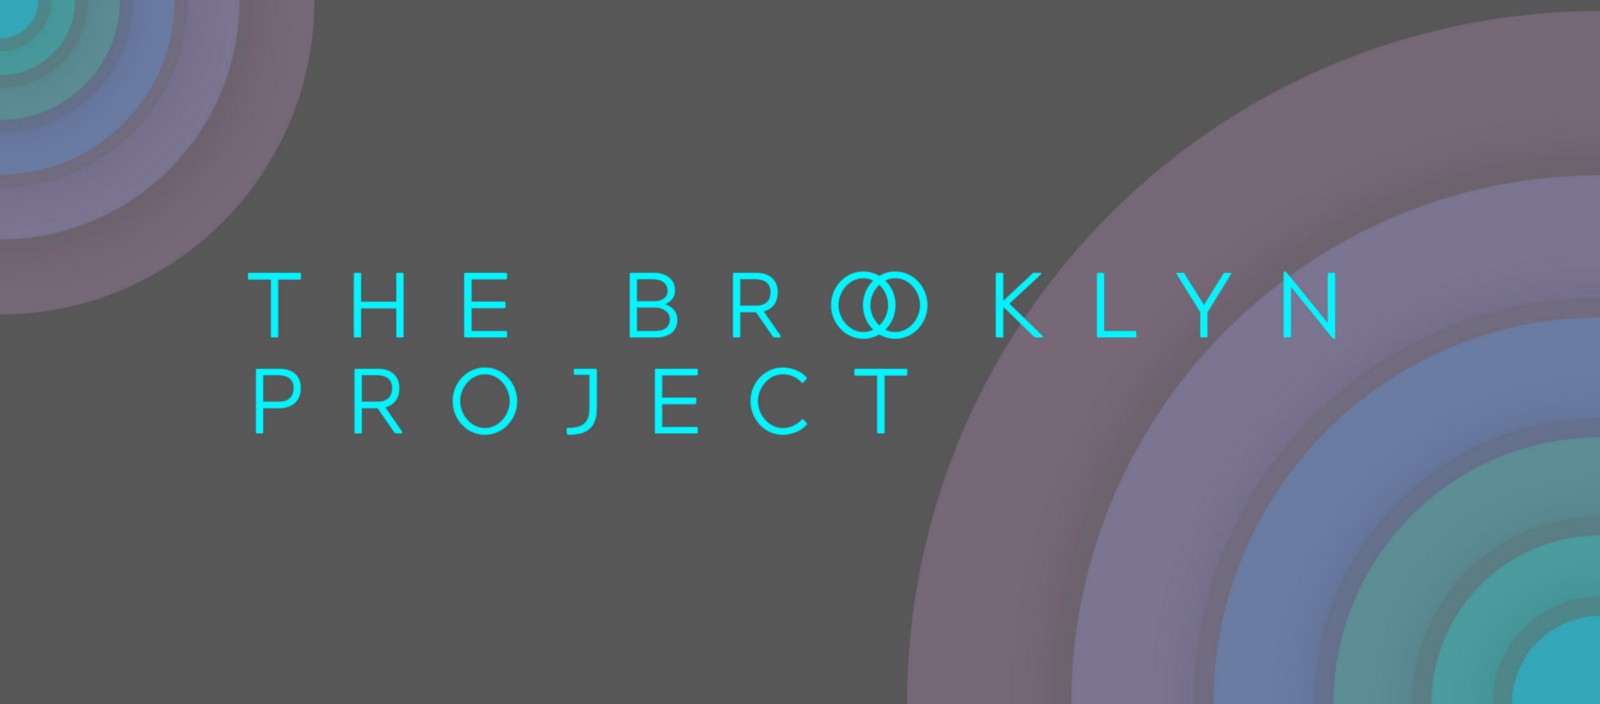 Announcing “The Brooklyn Project” for Token Launches | Medium